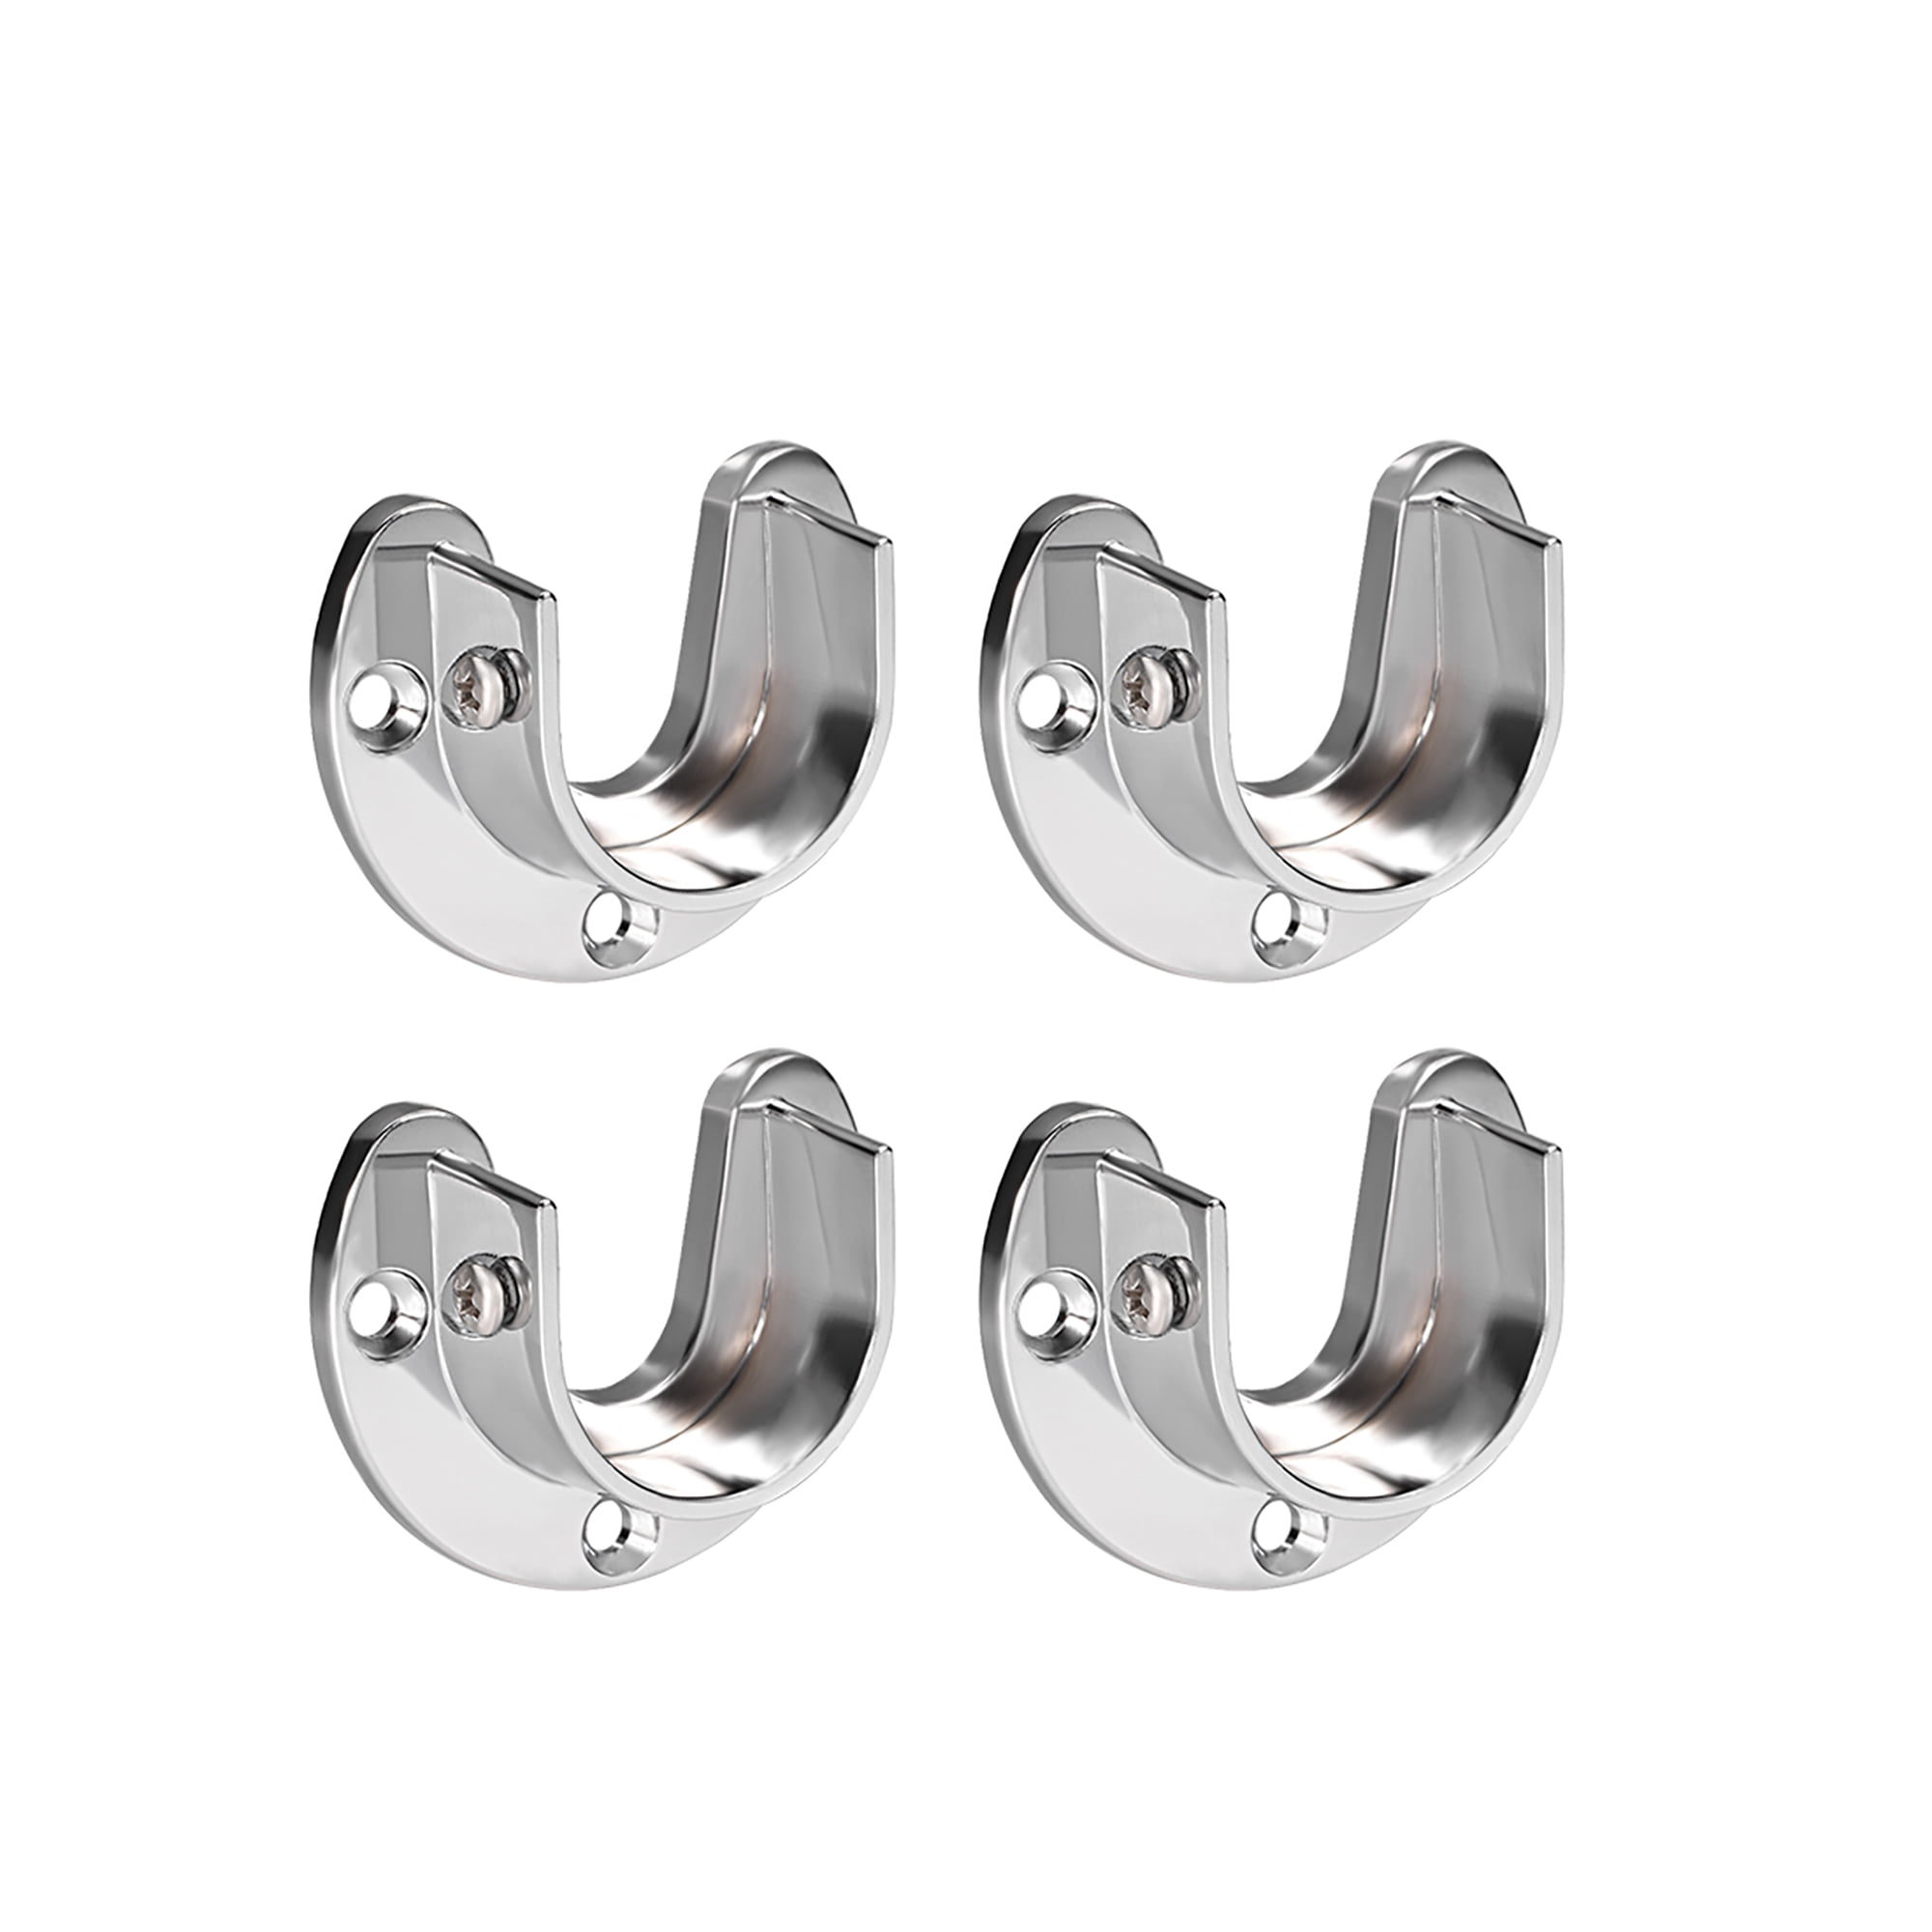 4 Pack Silver SDTC Tech 1 Inch Flange Rod Holder Heavy Duty Stainless Steel Closet Rod End Supports Wardrobe Pole Socket Bracket with Matching Screws 